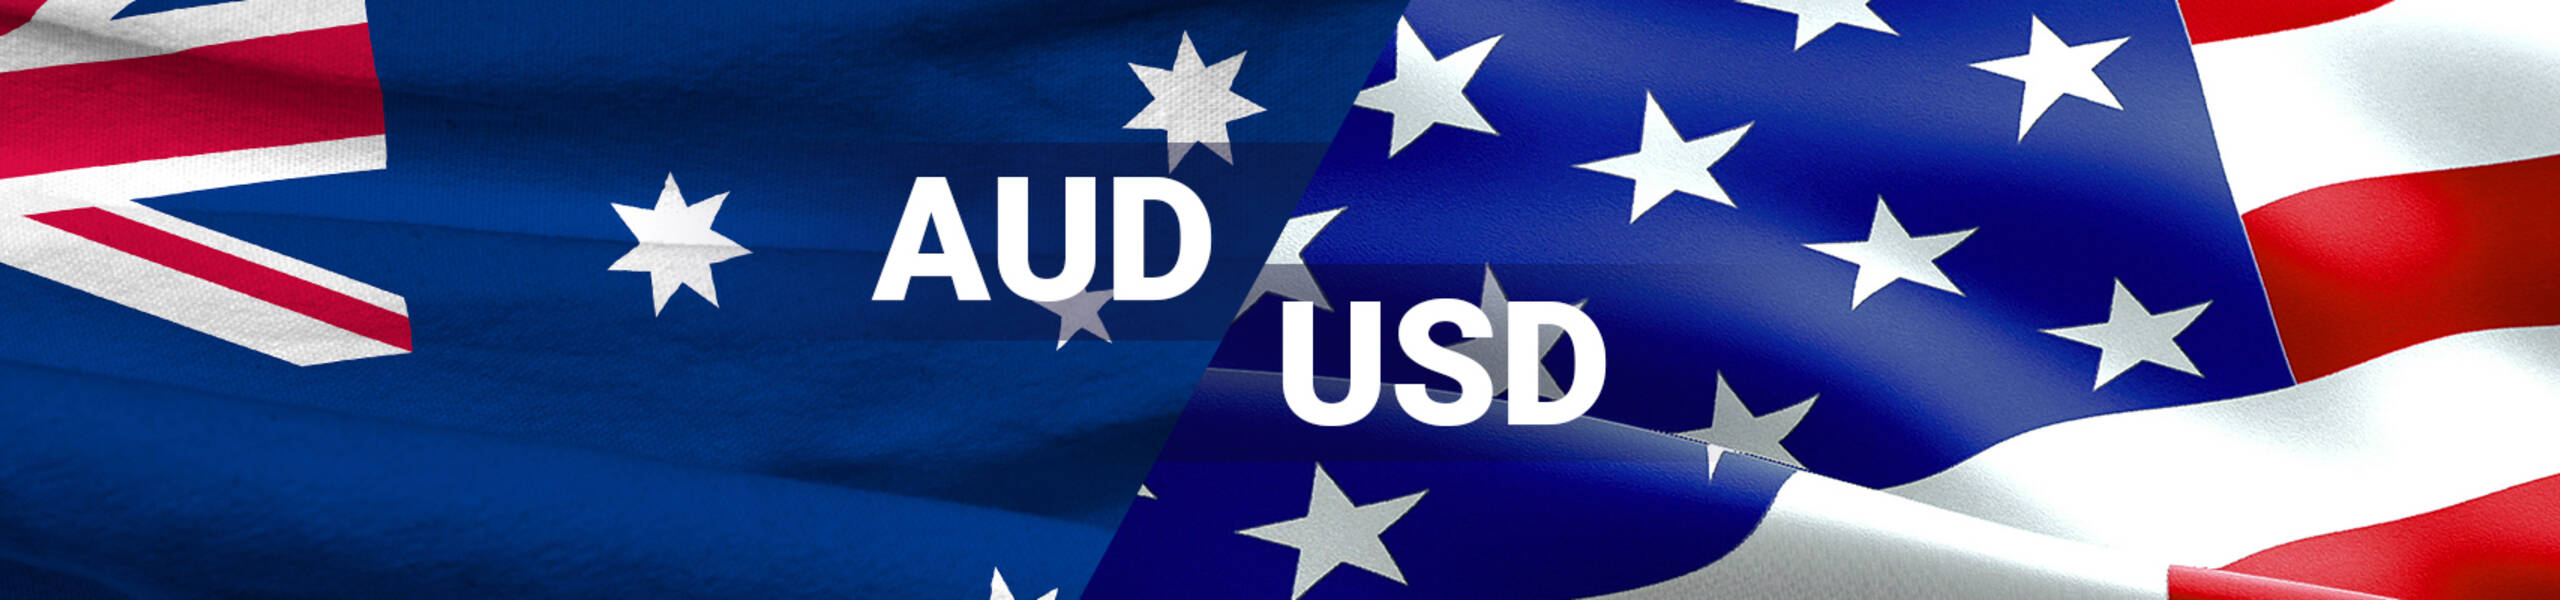 AUD/USD: will bulls show their weakness?